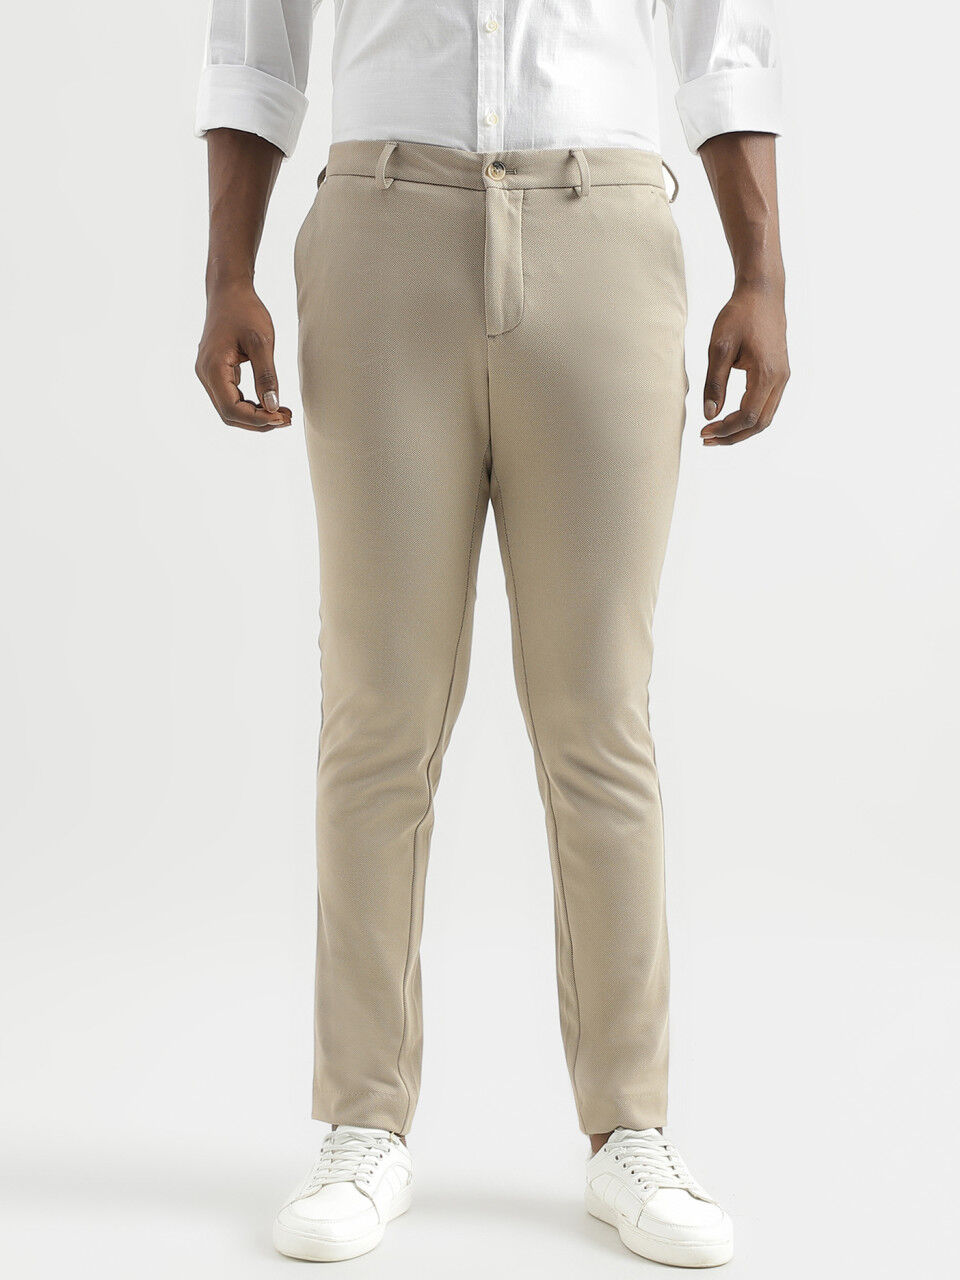 Buy UNITED COLORS OF BENETTON Solid Cotton Stretch Slim Fit Mens Trousers   Shoppers Stop